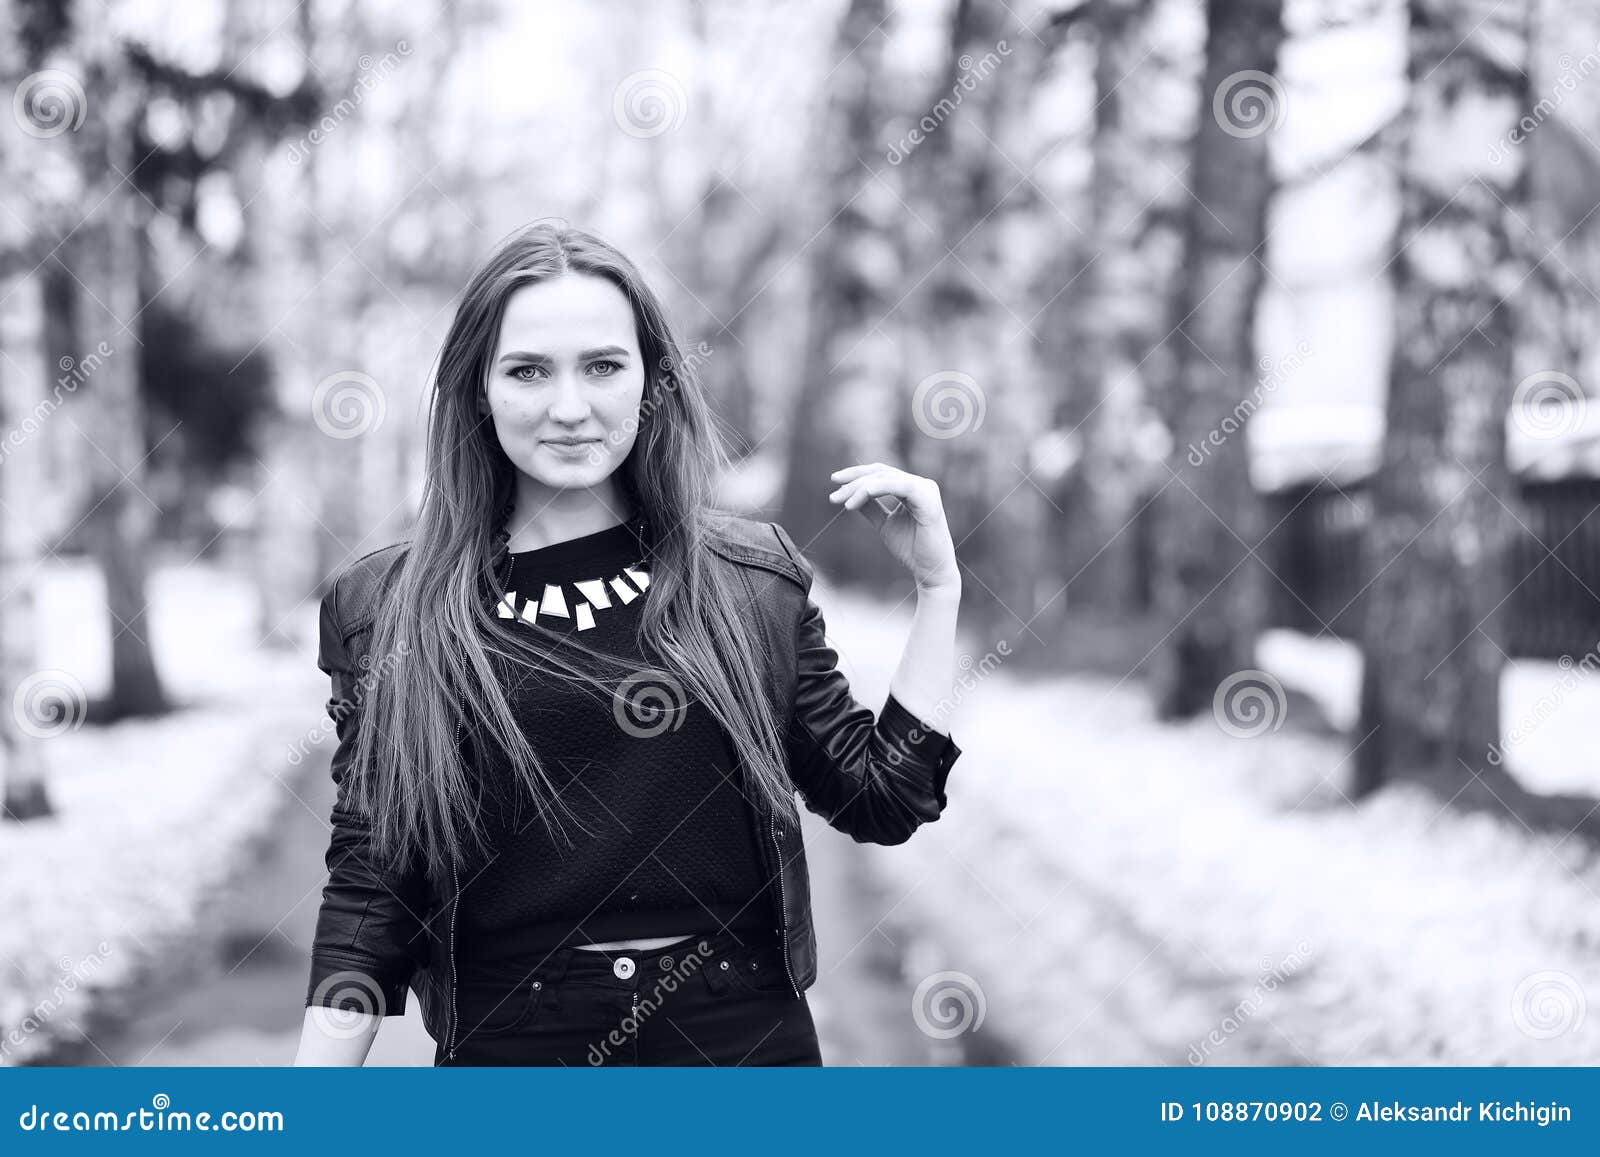 Toned Picture of a Young Cute Girl on a Walk Stock Photo - Image of ...